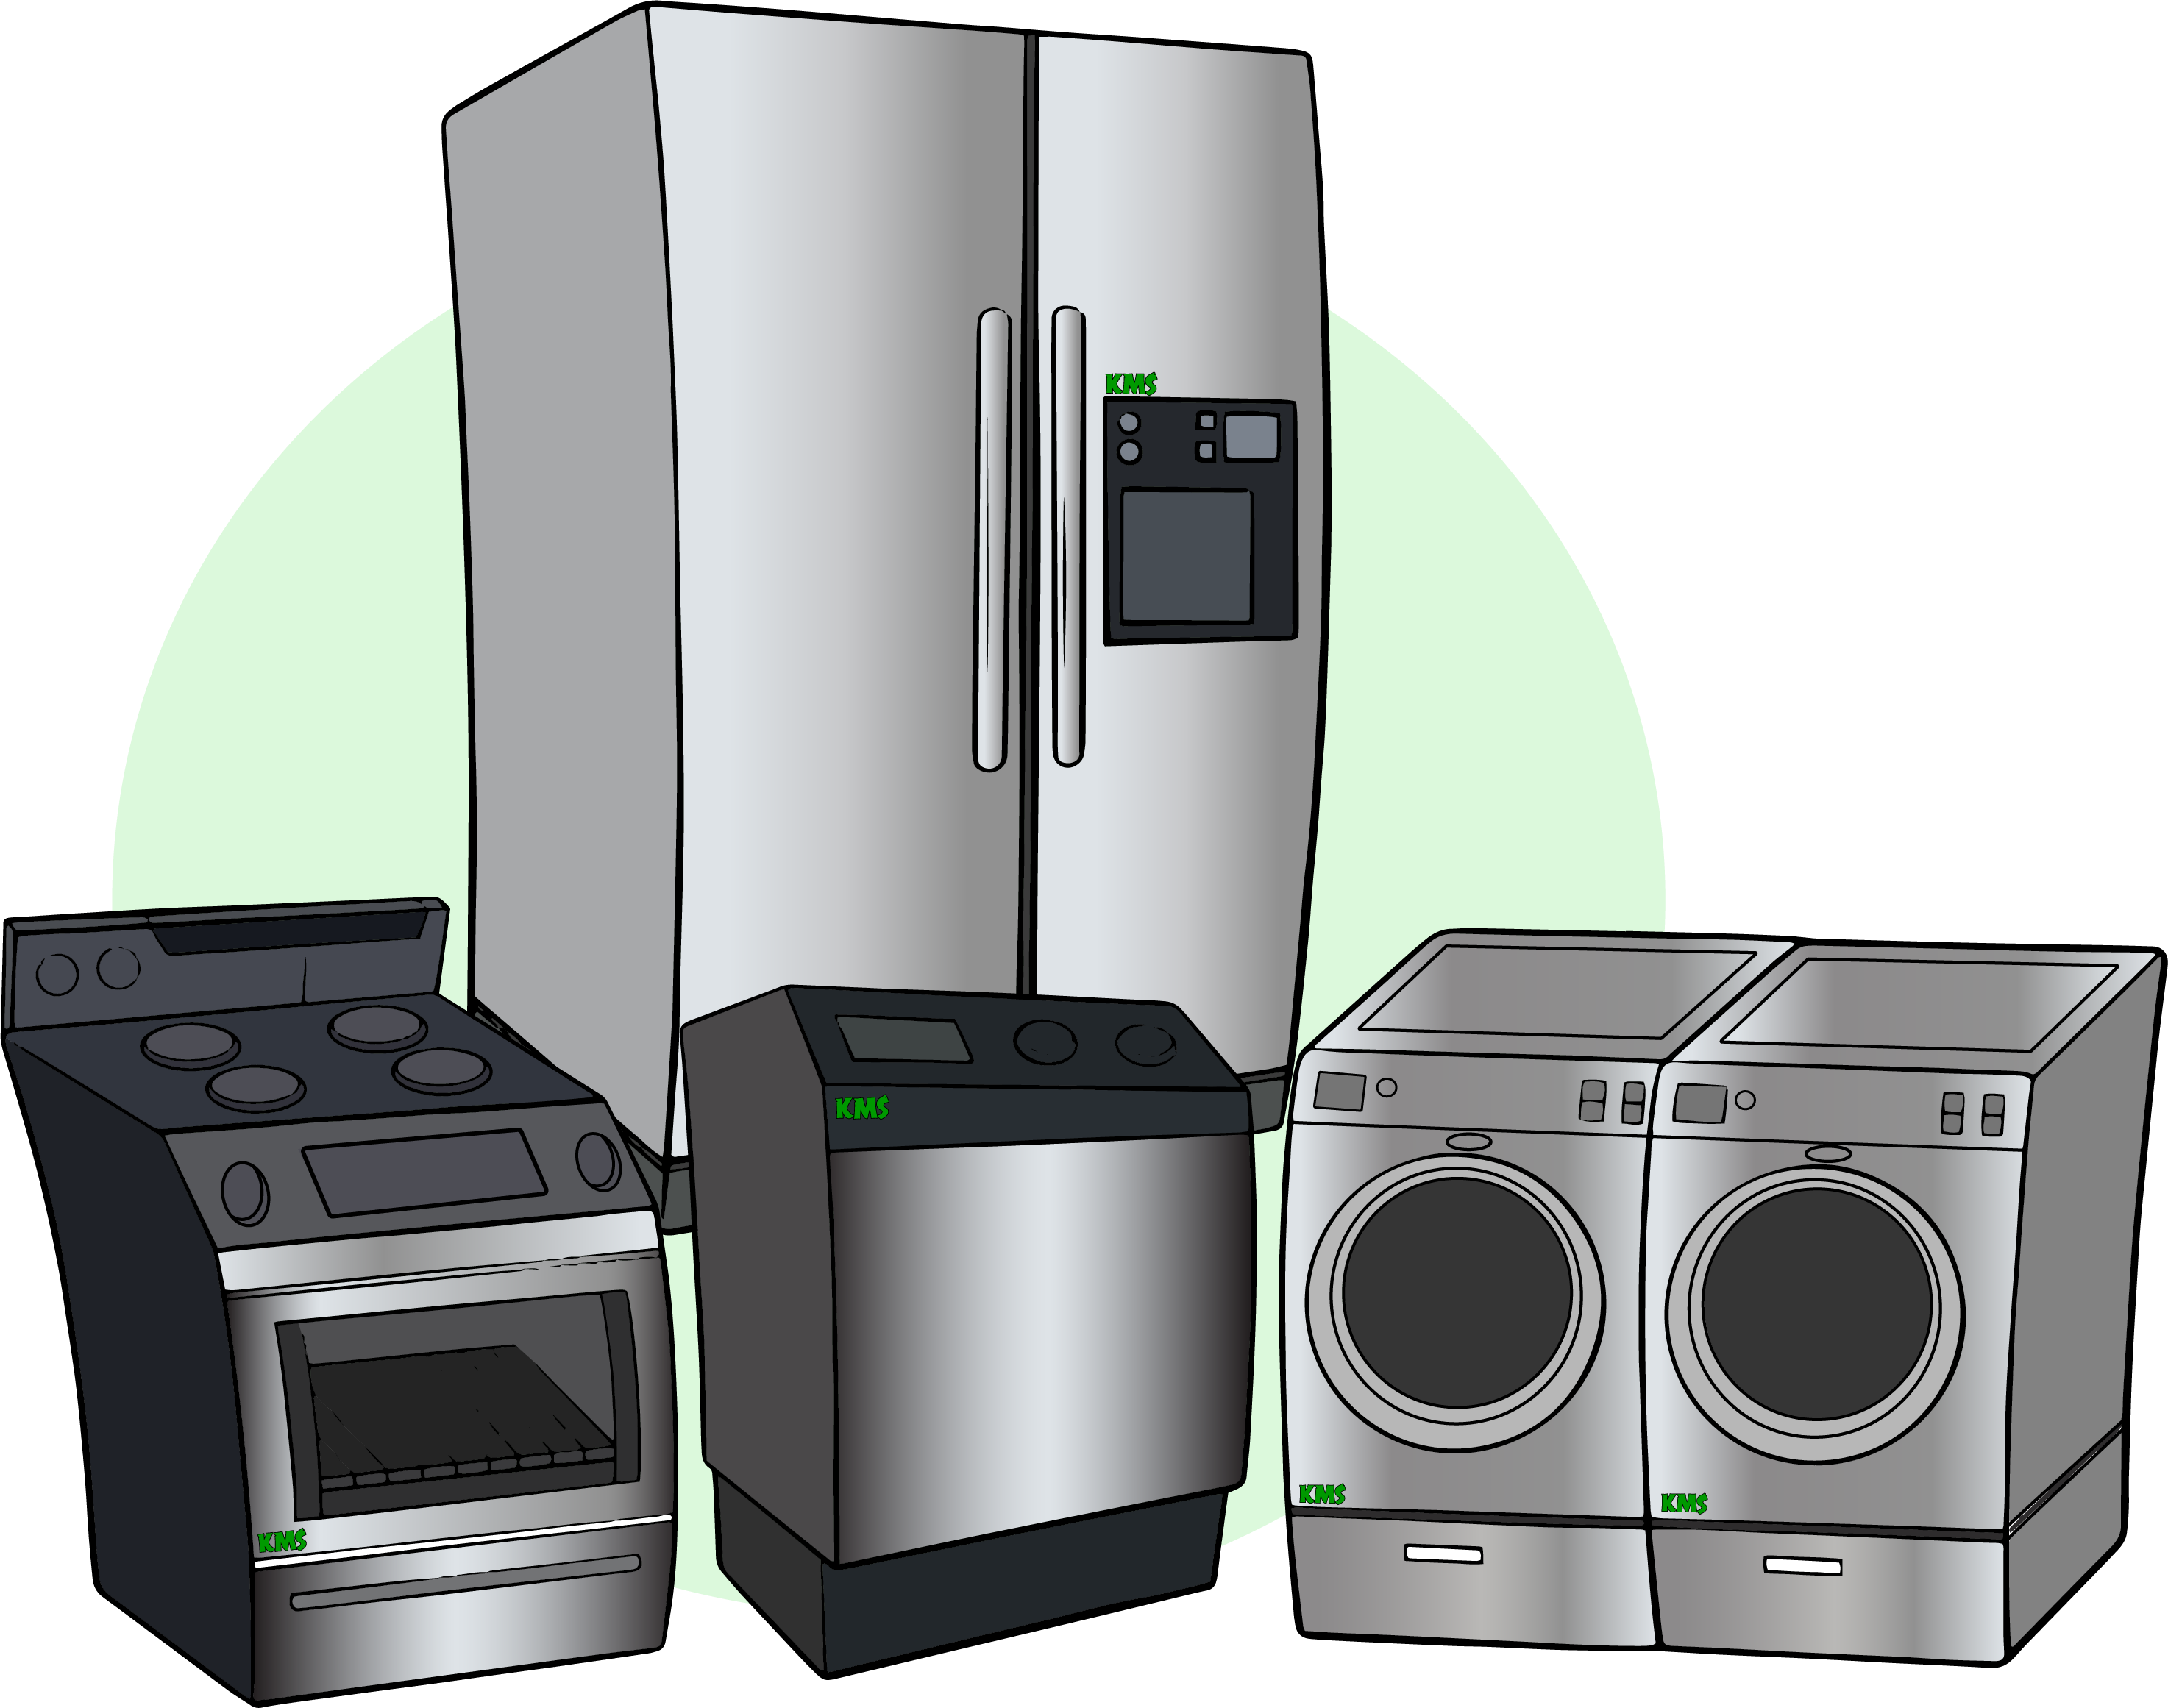 Inglis appliance repair service in montreal